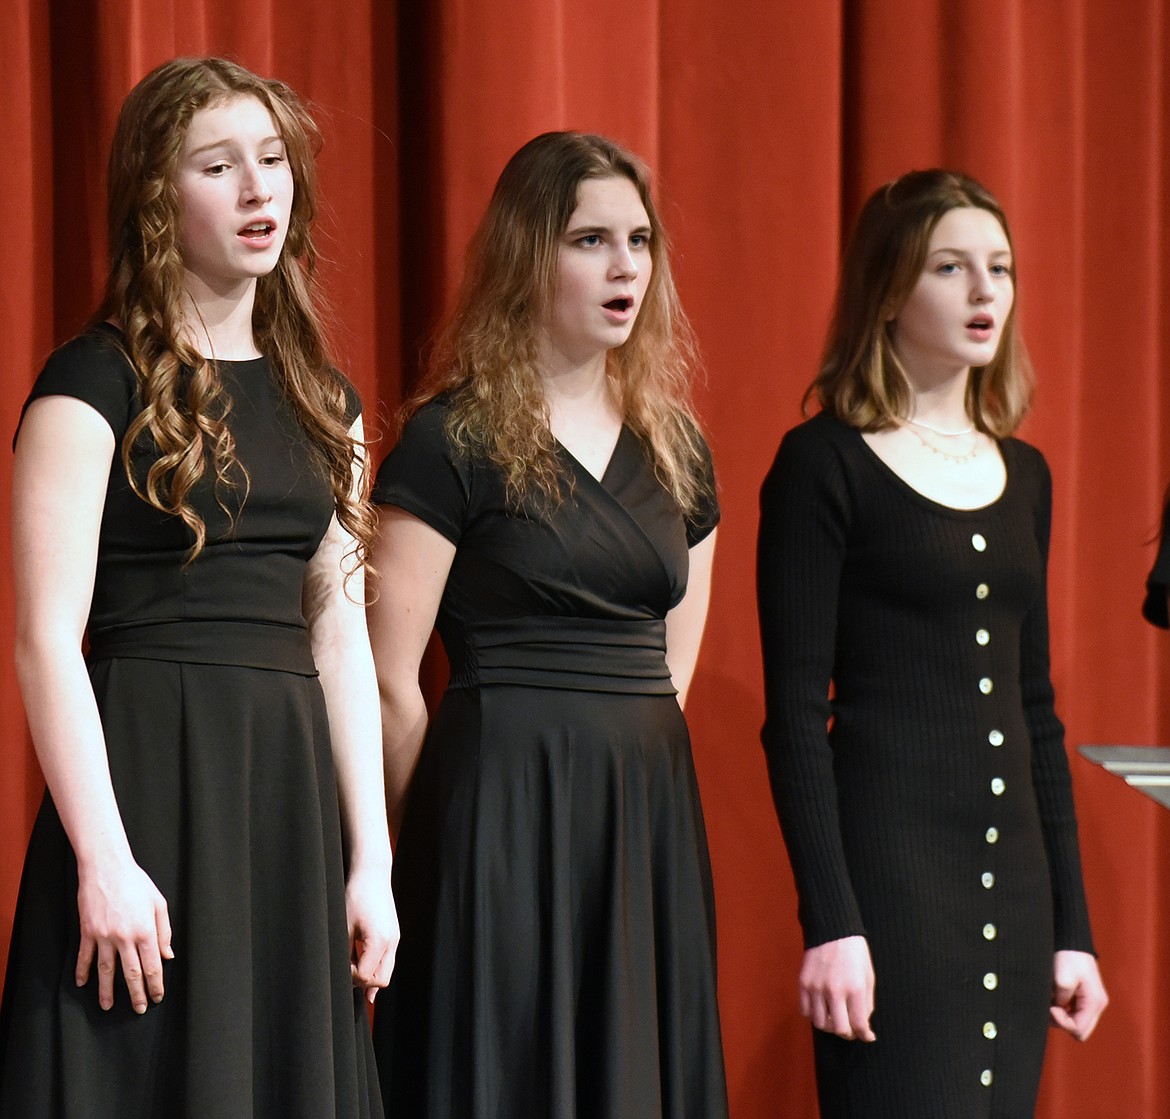 Whitefish High School choir members Hanna Gawe, Marina Nugent and Ava Bee sing as part of the Treble Choir recently during Whitefish Schools choir winter concert at the Whitefish Performing Arts Center. (Heidi Desch/Whitefish Pilot)